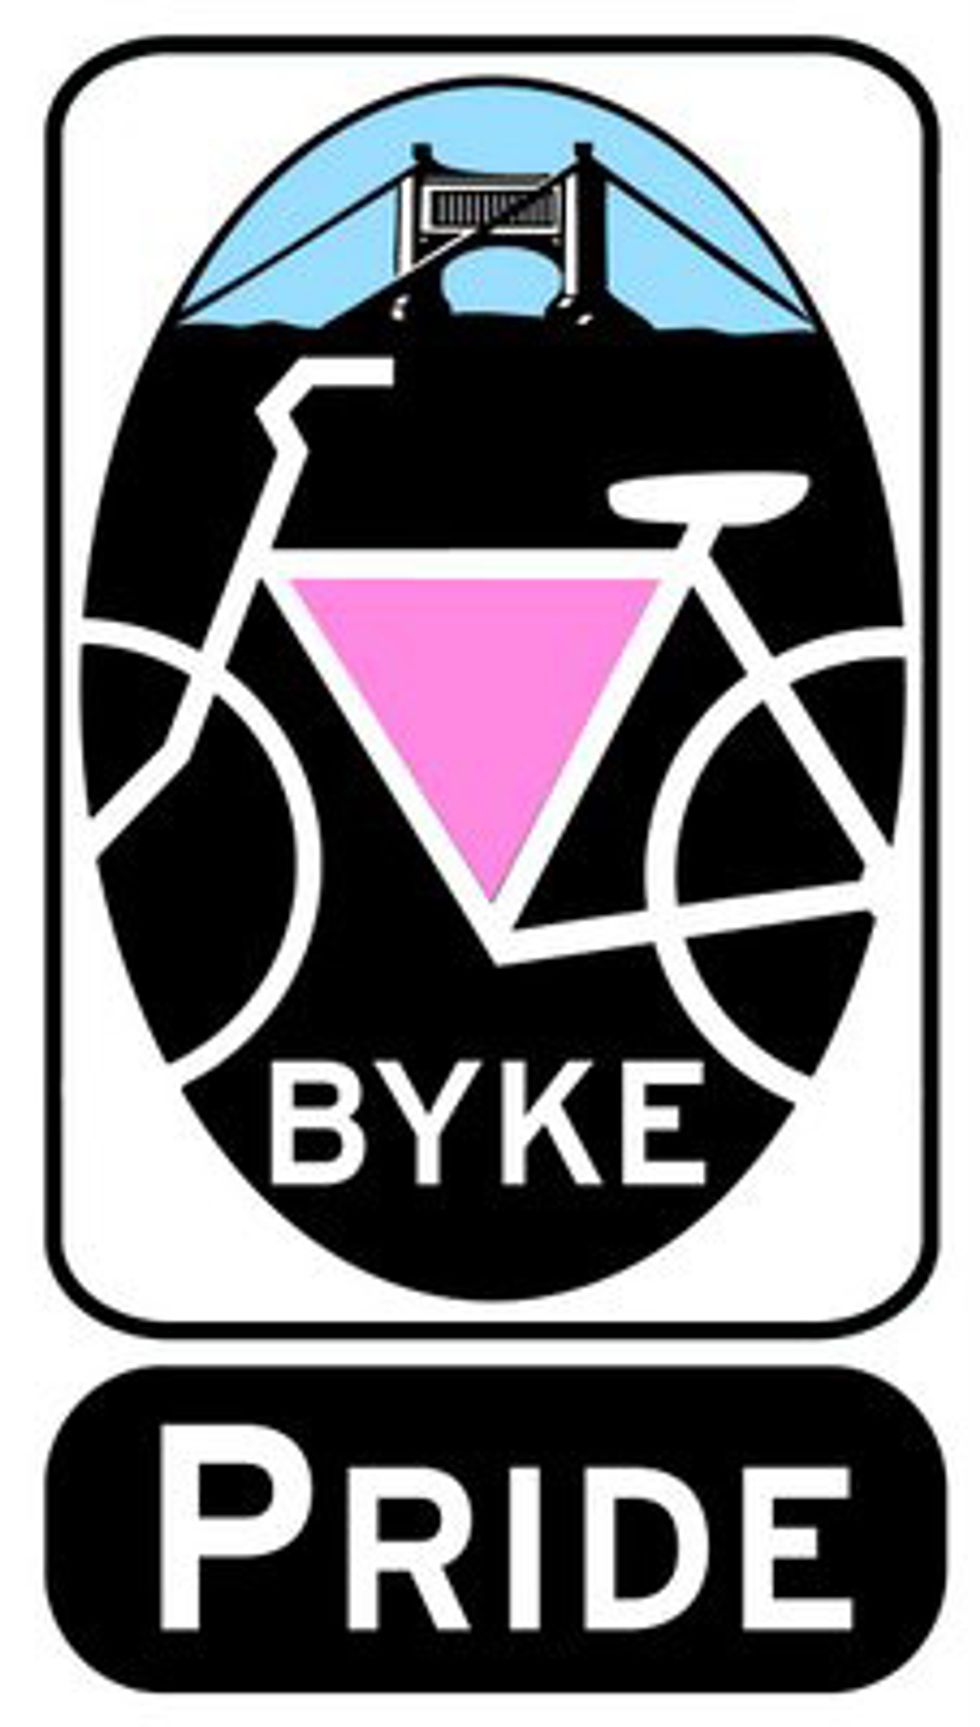 Ride with Pride: Four Ways to Get Your “Byke” Pride on This Month